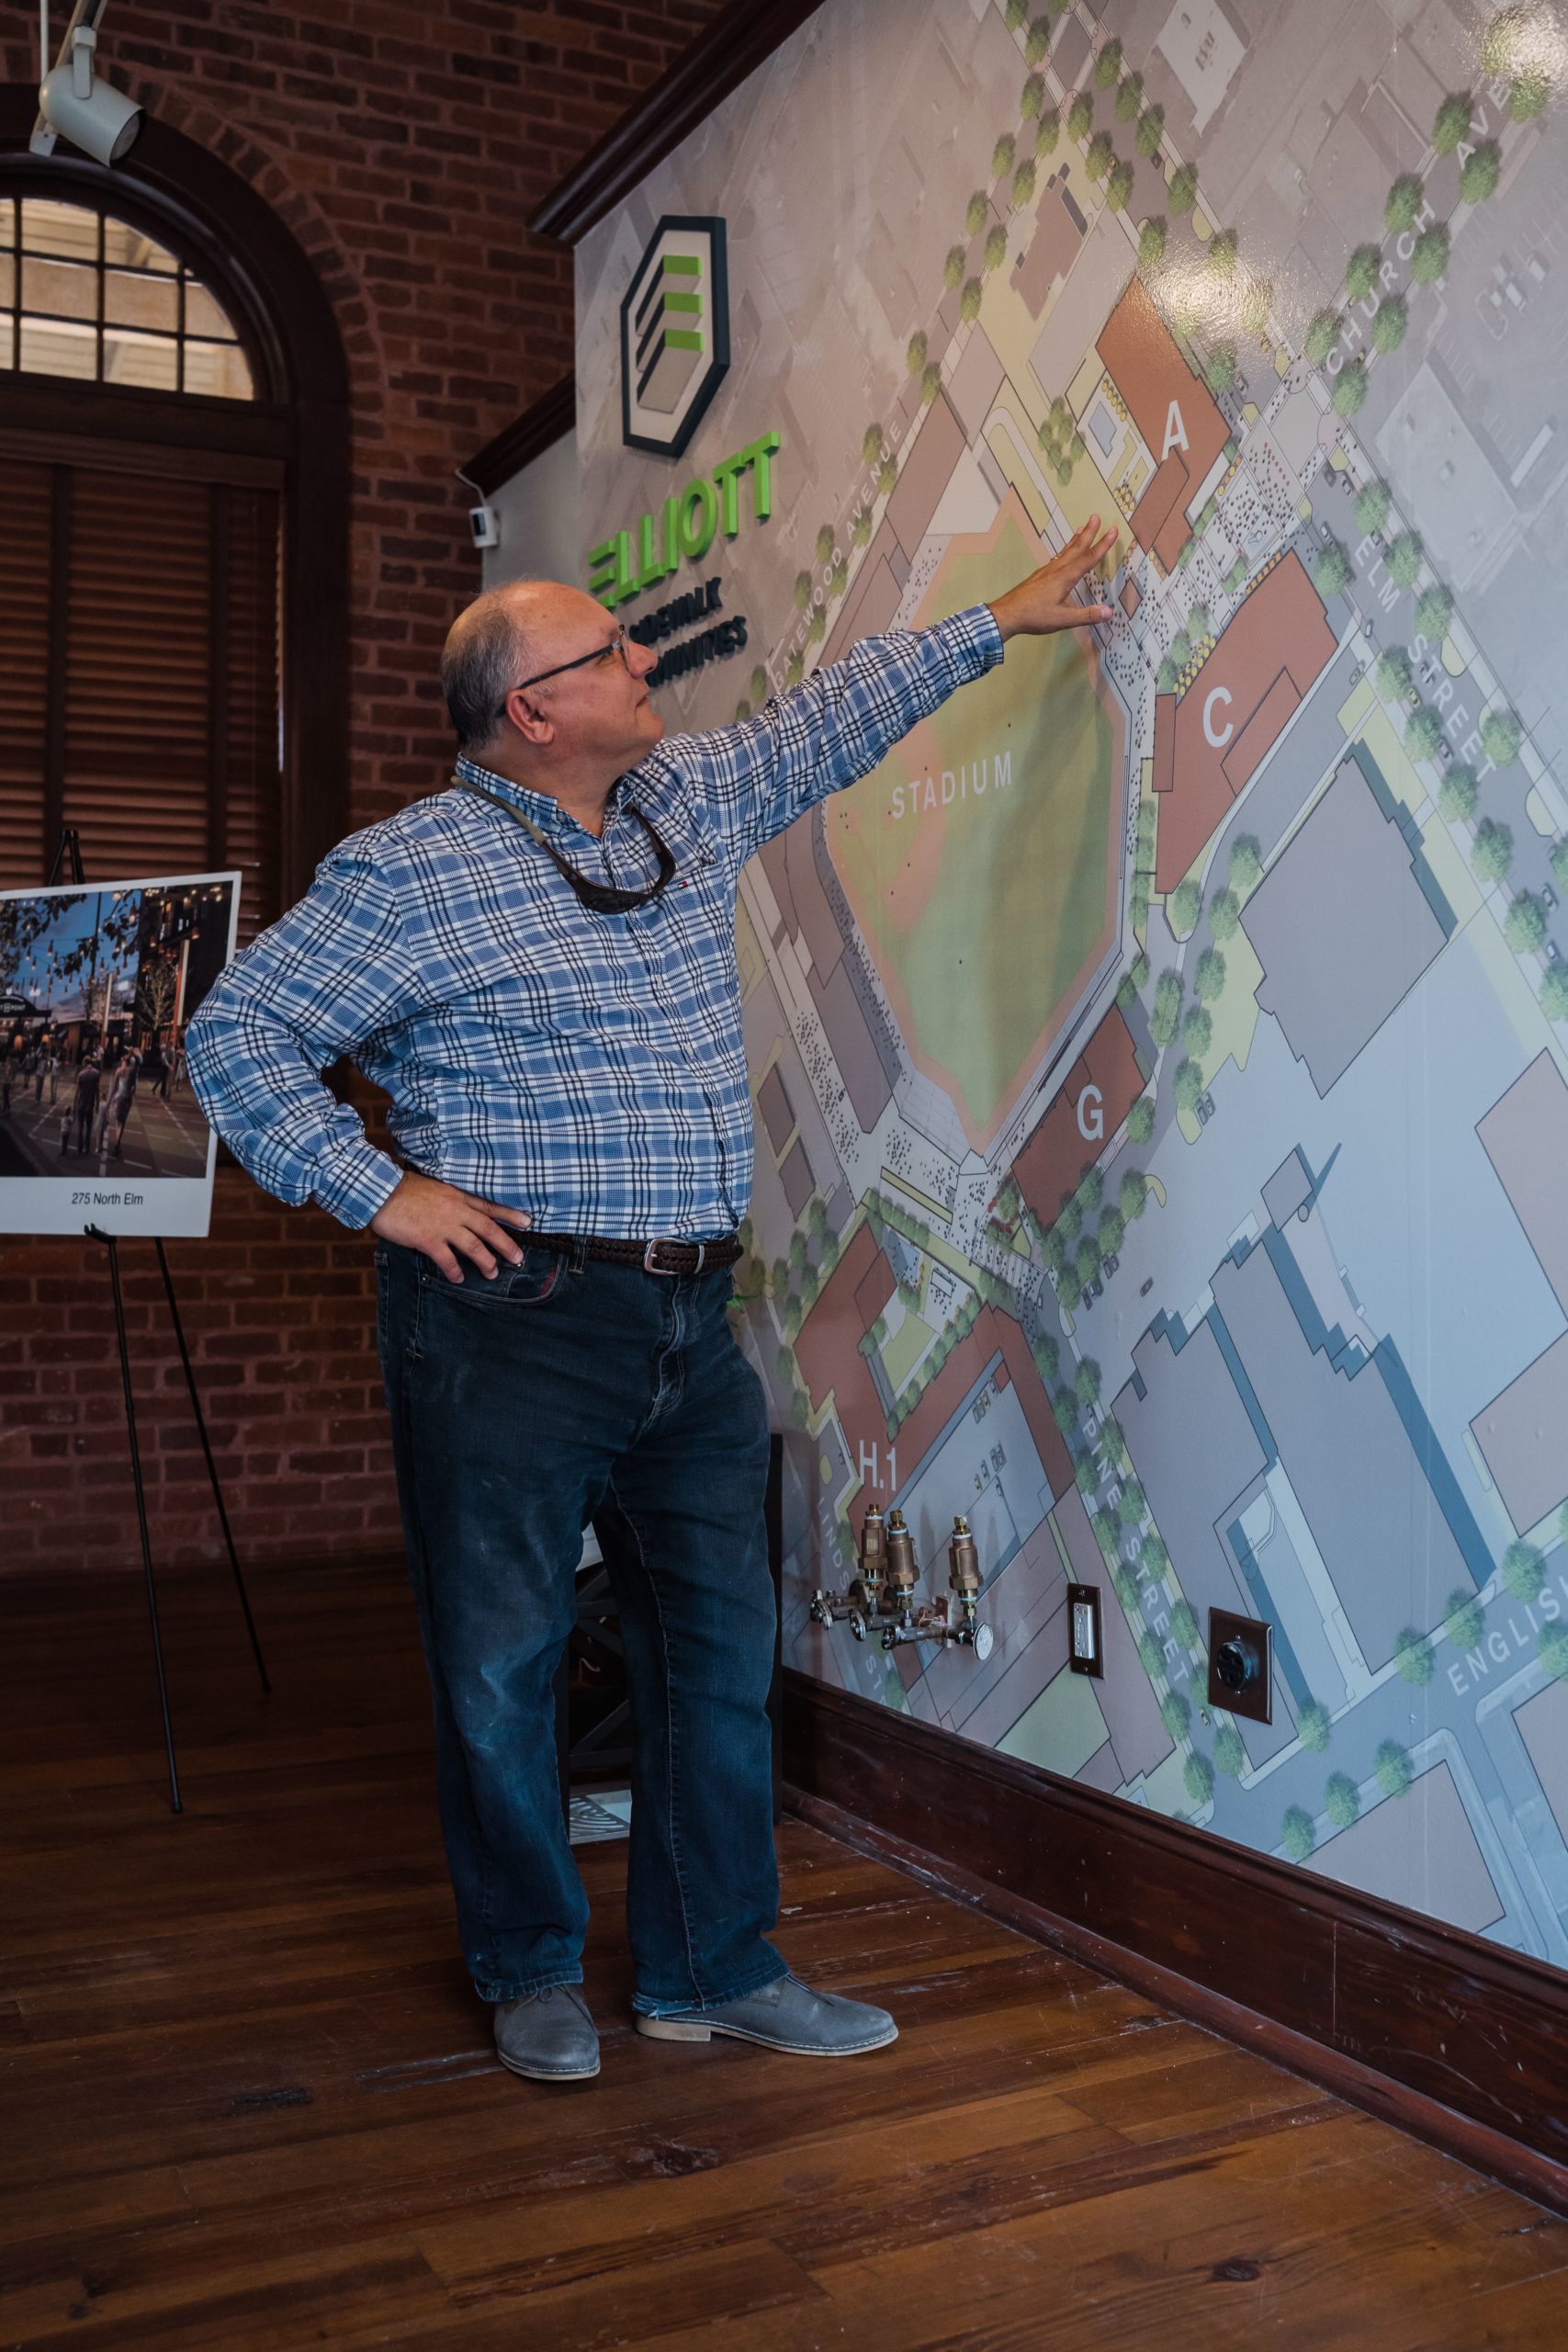 Tim Elliot, Founder of Elliot Sidewalk Communities points to a map of The Outfields in High Point, NC.